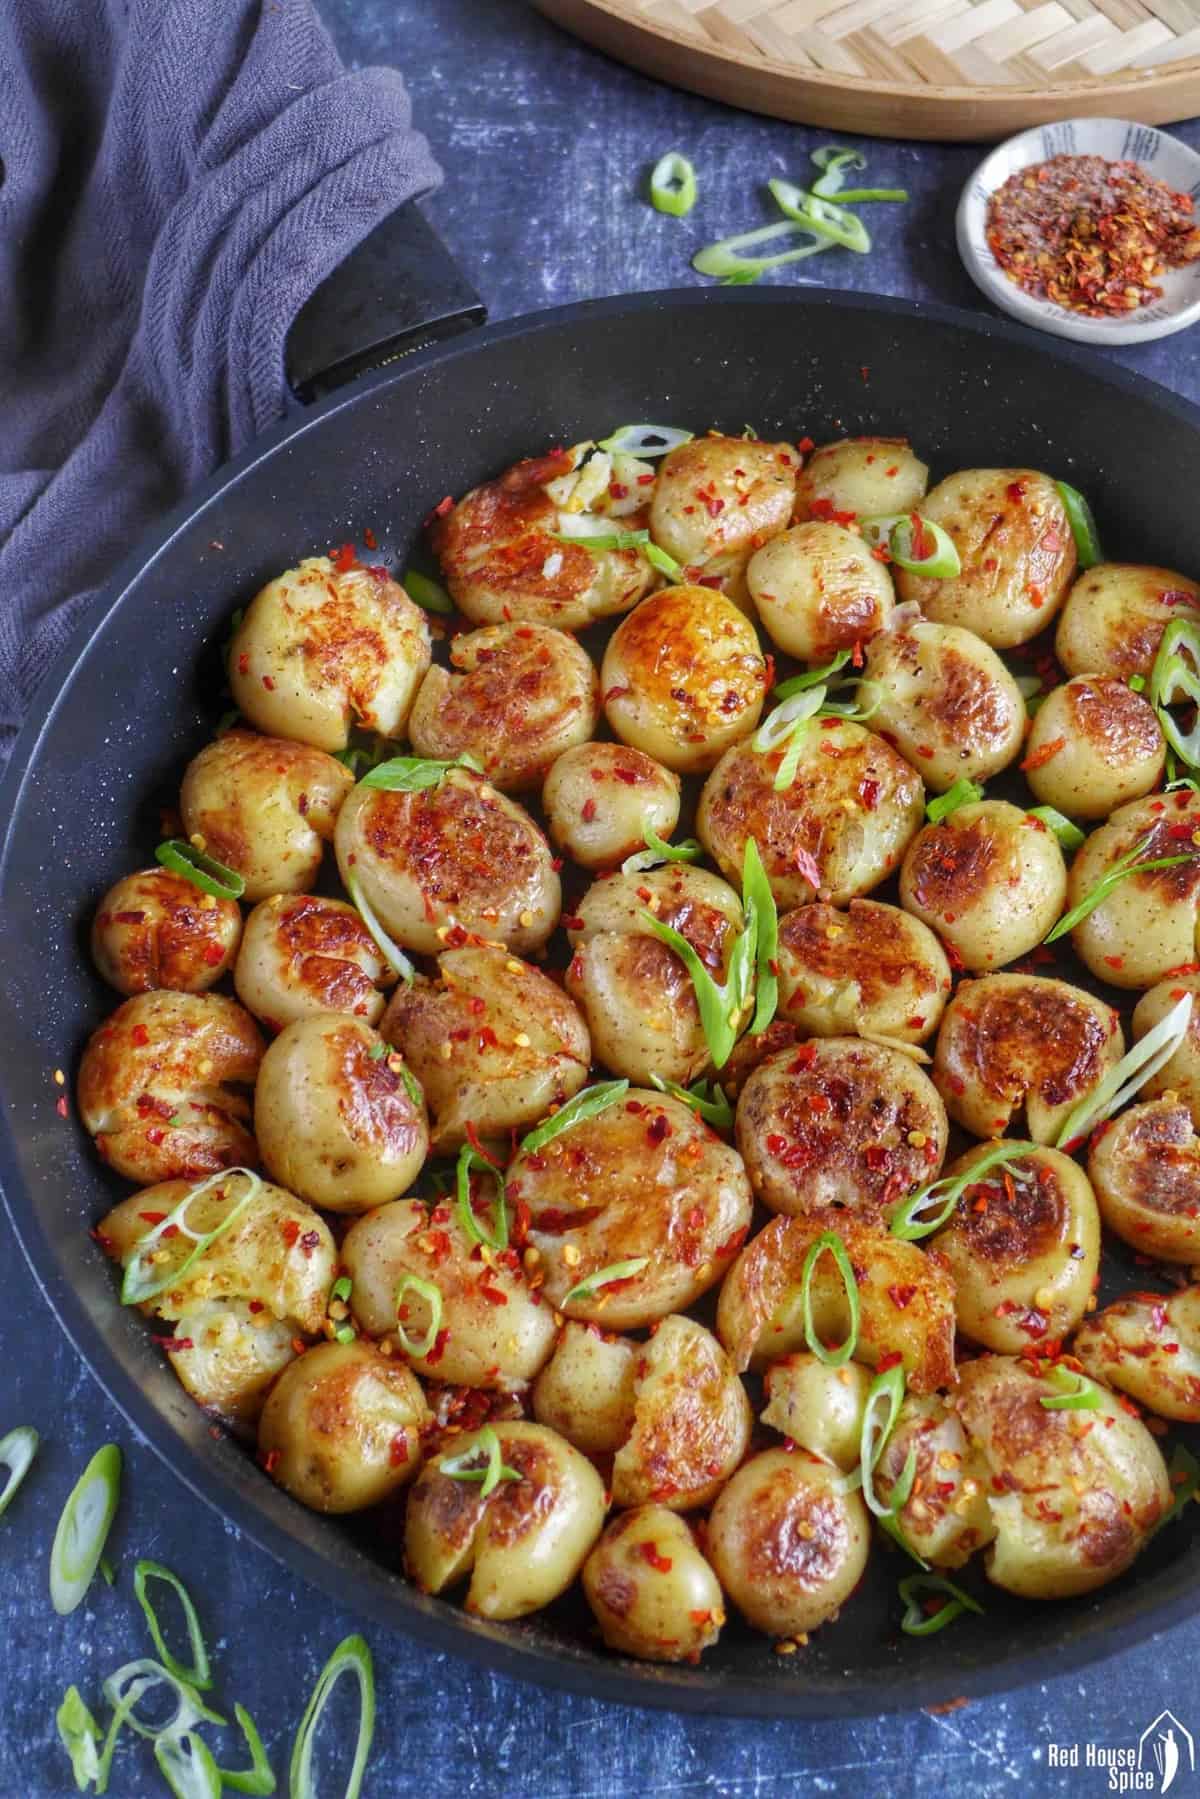 Pan-fried baby potatoes with chili and five spic